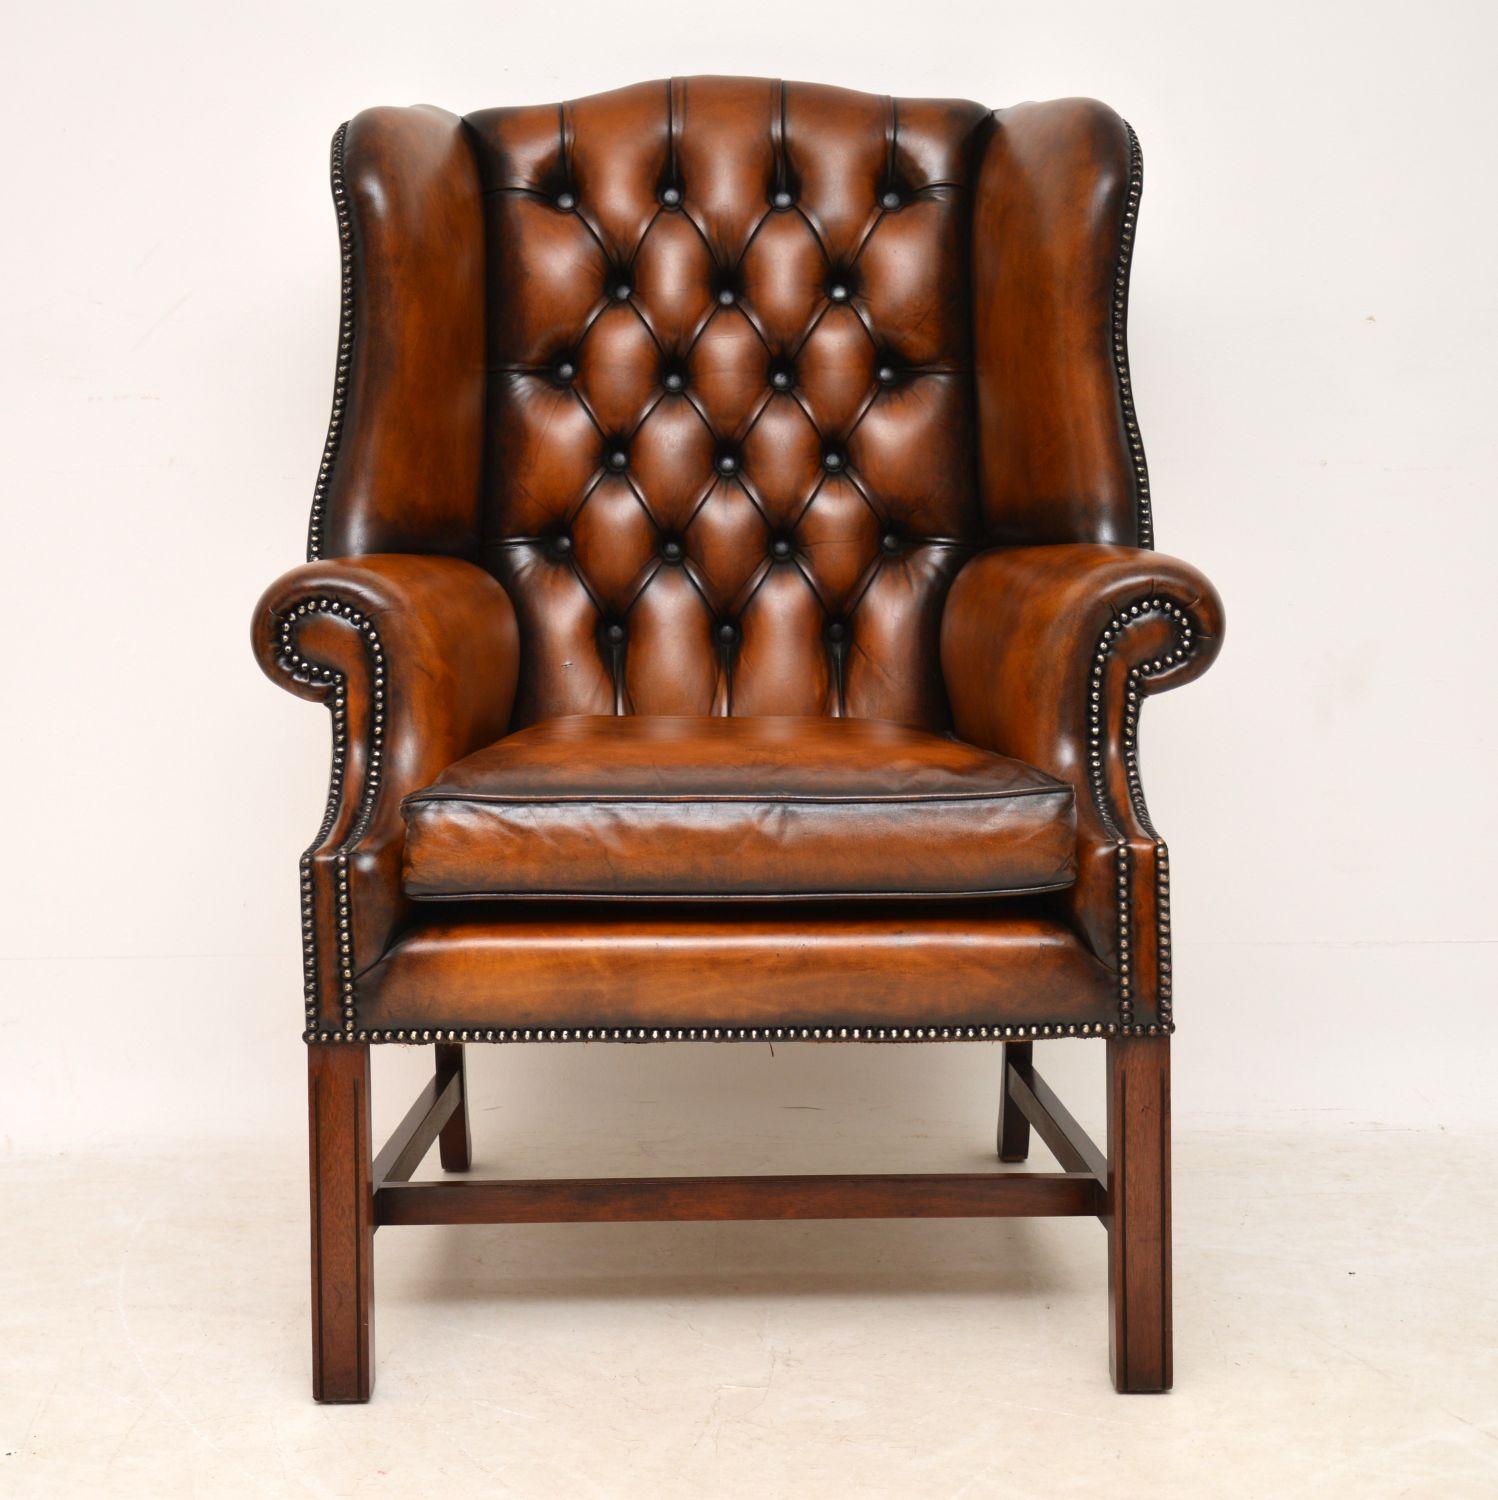 Antique George III style brown leather wing armchair with a deep buttoned back and dating from circa 1950s period. This armchair is in very good condition and has loads of character, having just been revived and polished by our leather expert. It’s